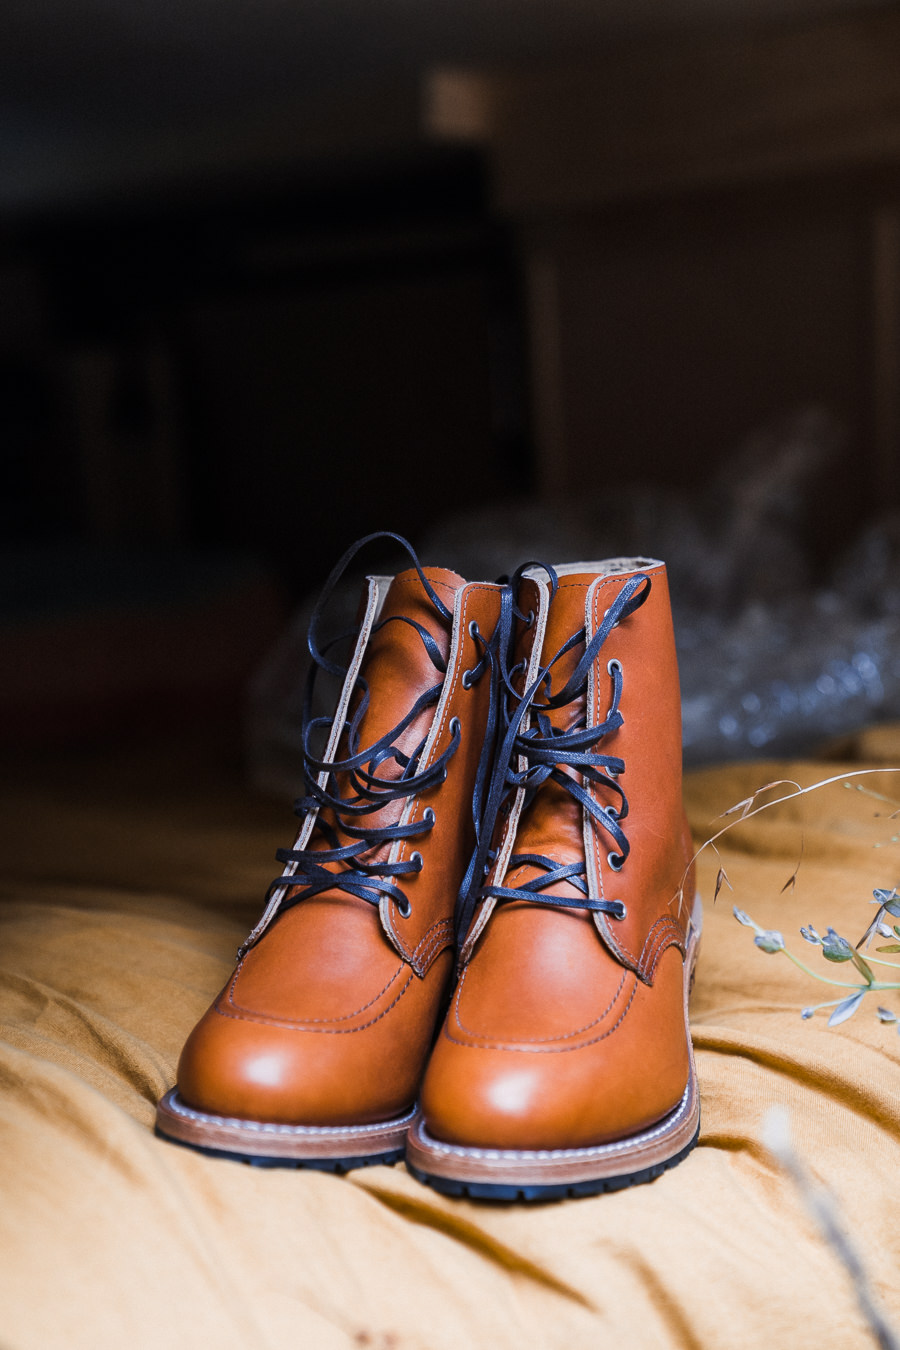 leather boots with blue laces for an elopement